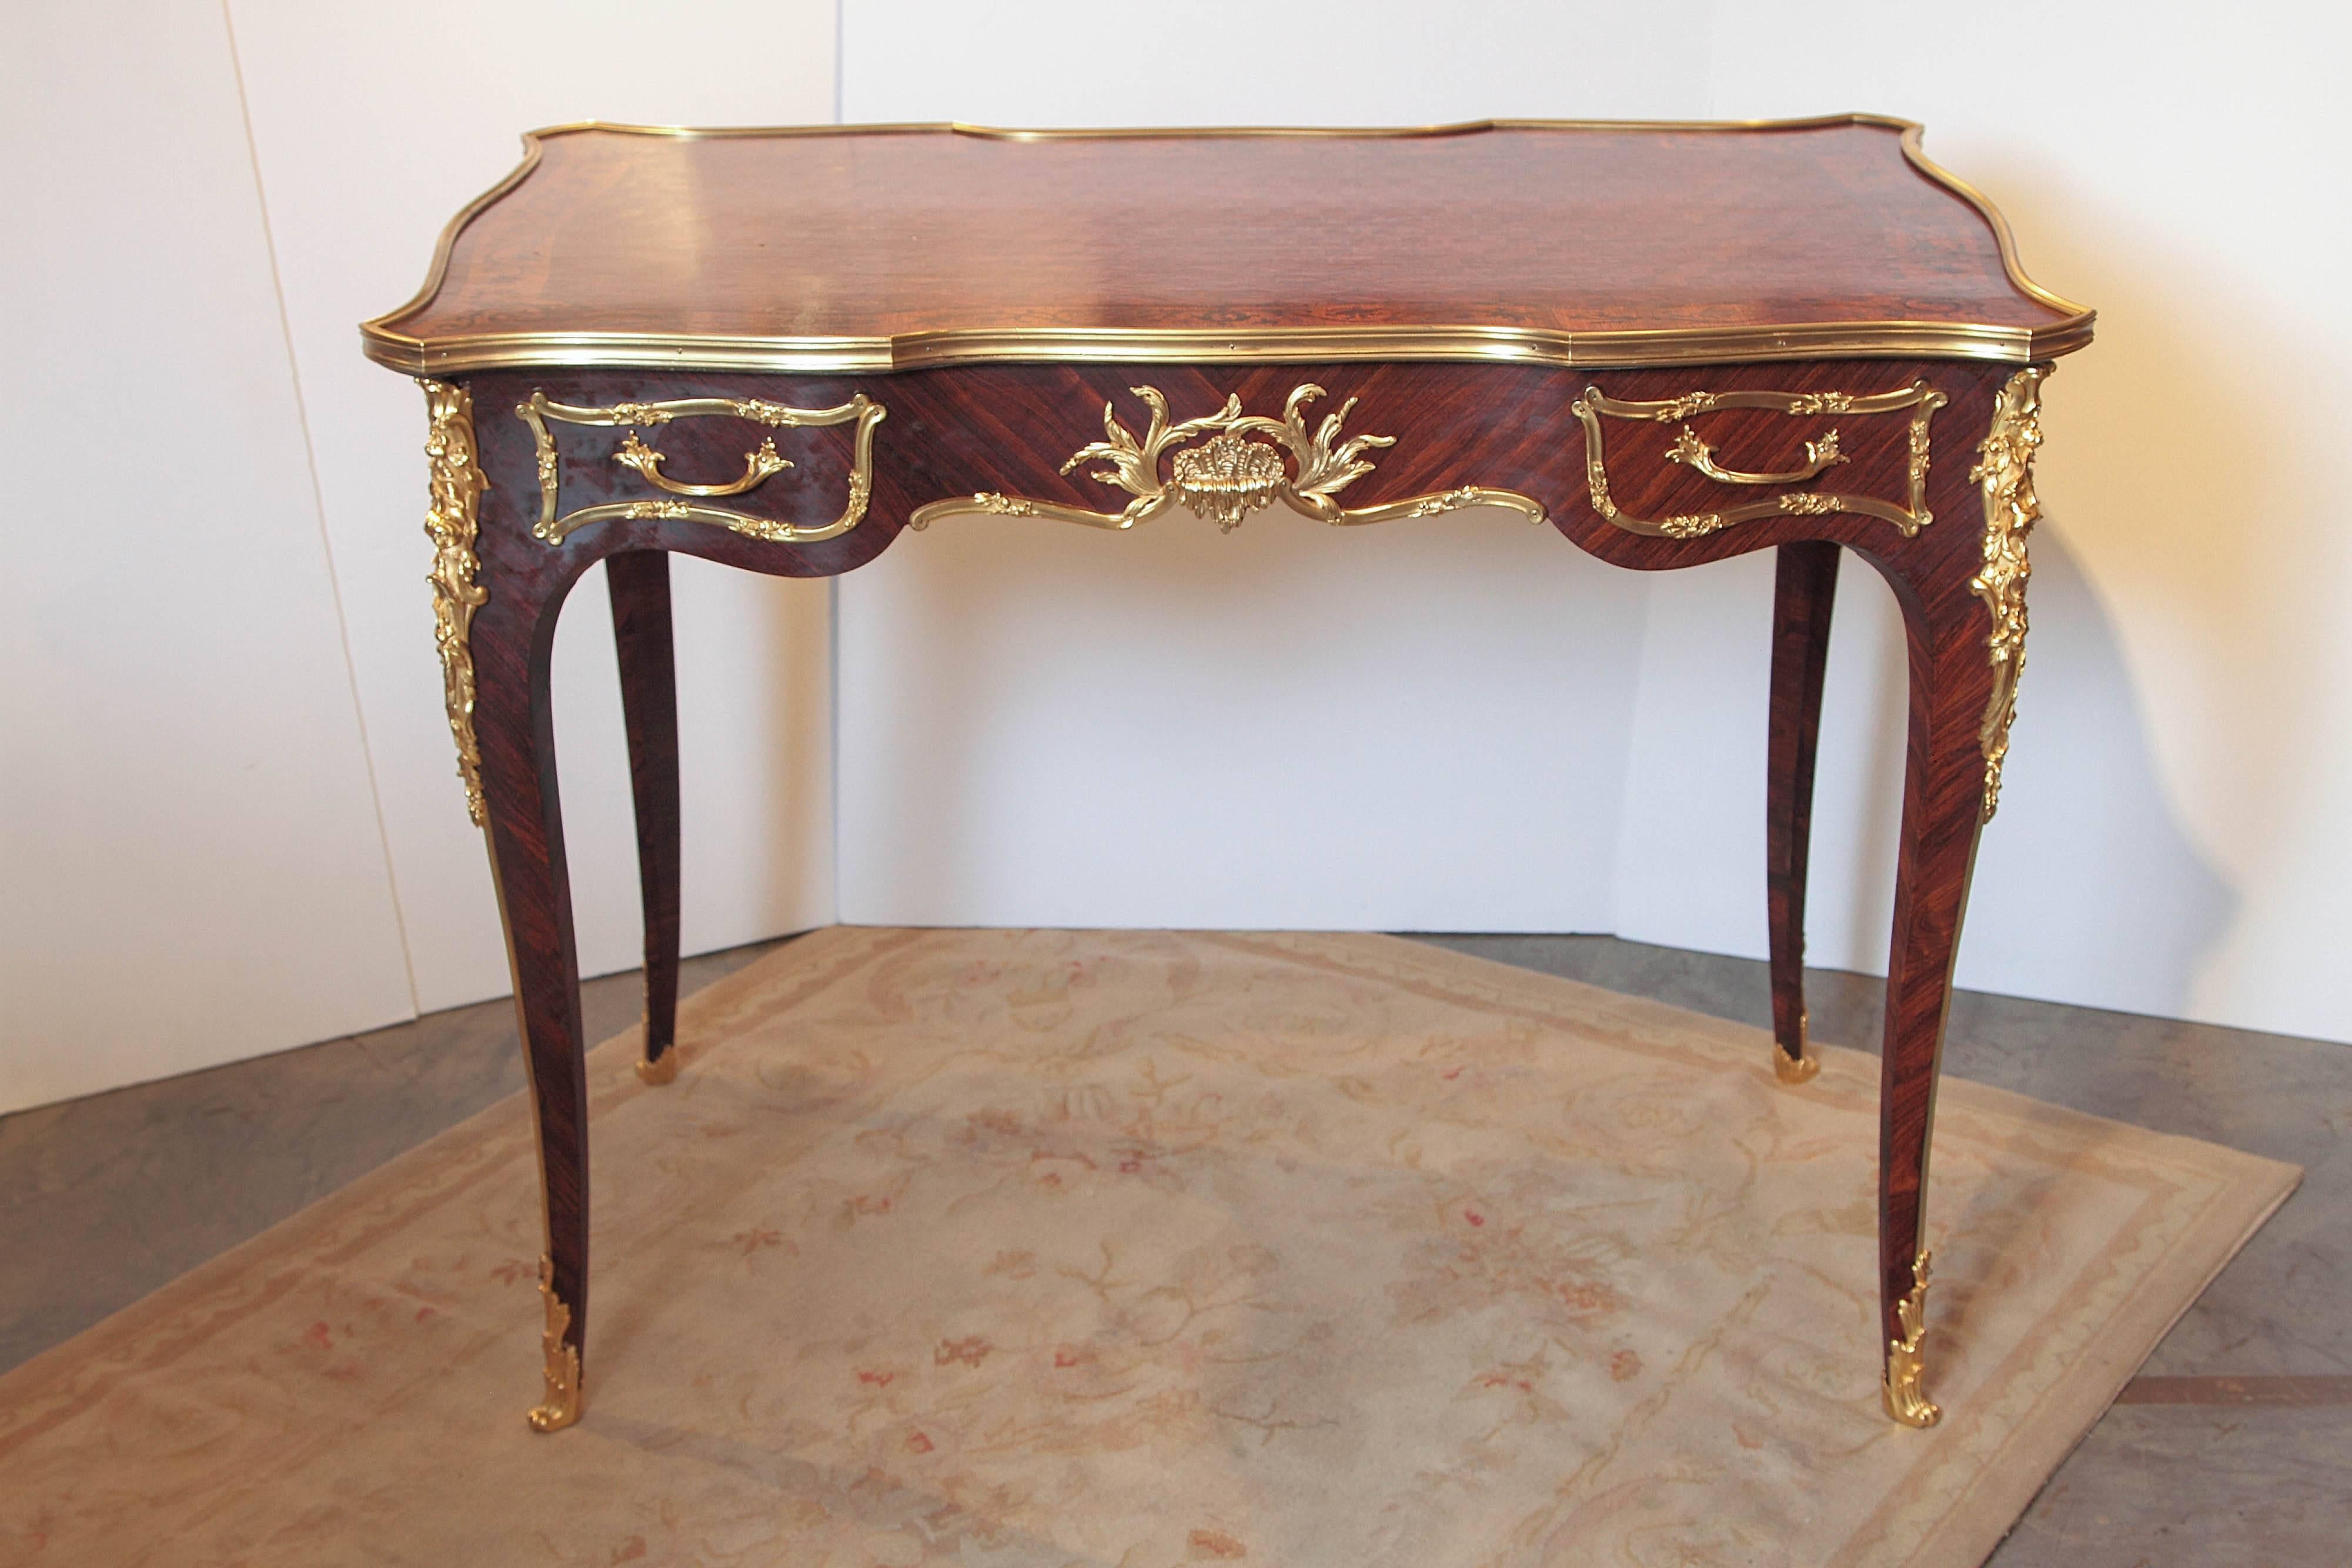 19th century French Louis XV mahogany and parquetry writing desk. Fine gilt bronze mounts signed F Linke.